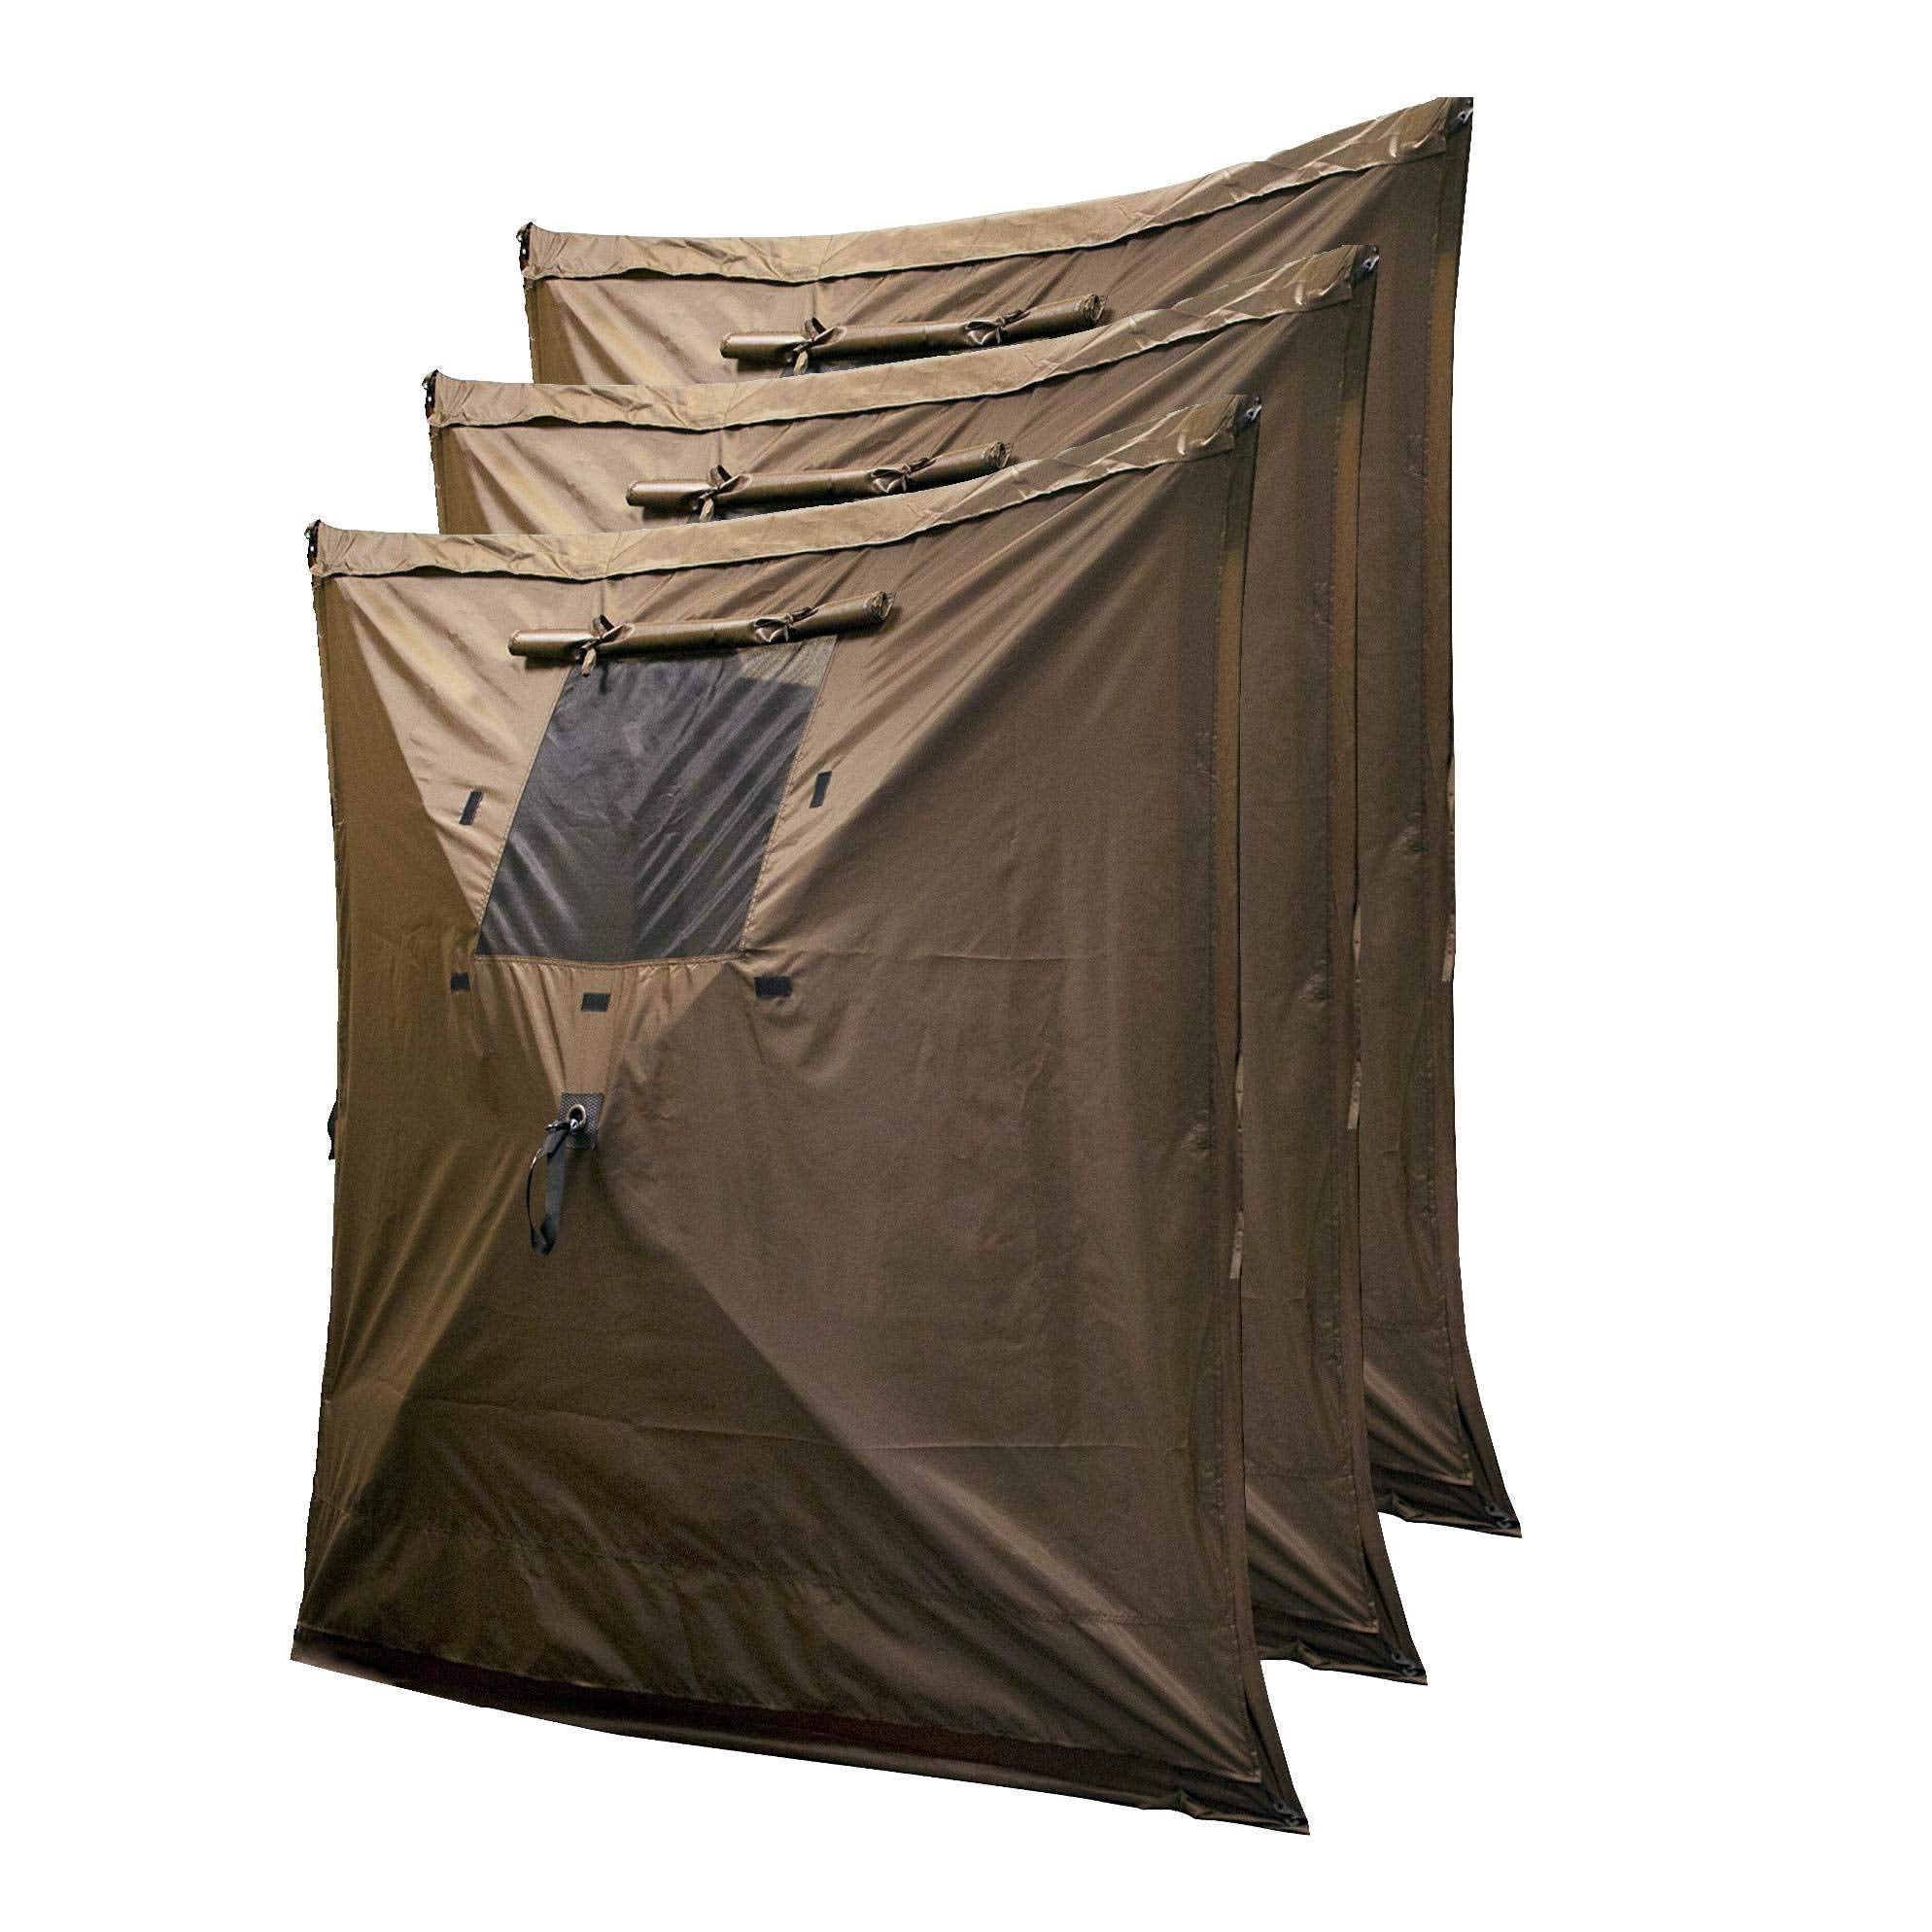 CLAM Quick-Set Escape Sky Screen 11.5 x 11.5 Foot Portable Pop-Up Outdoor Camping Gazebo Screen Tent for Parties with Ground Stakes & Carry Bag, Brown